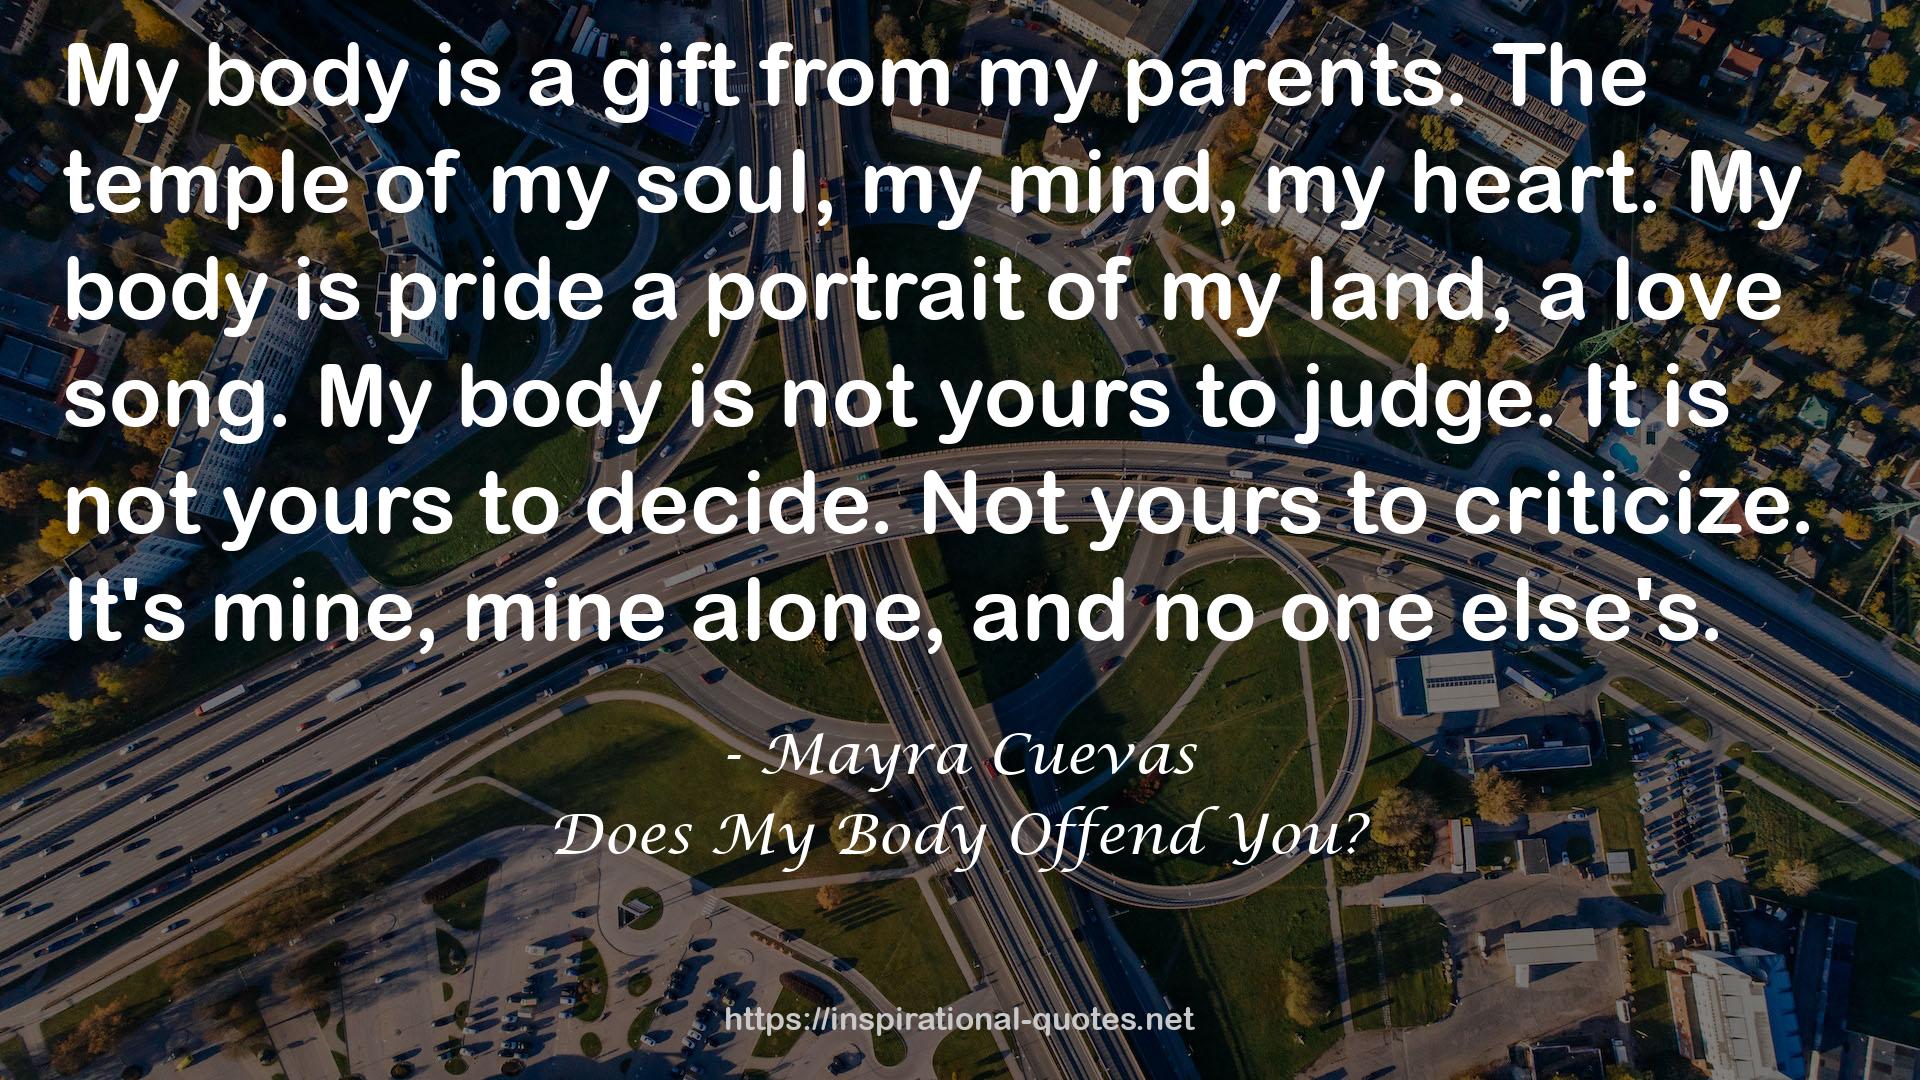 Does My Body Offend You? QUOTES